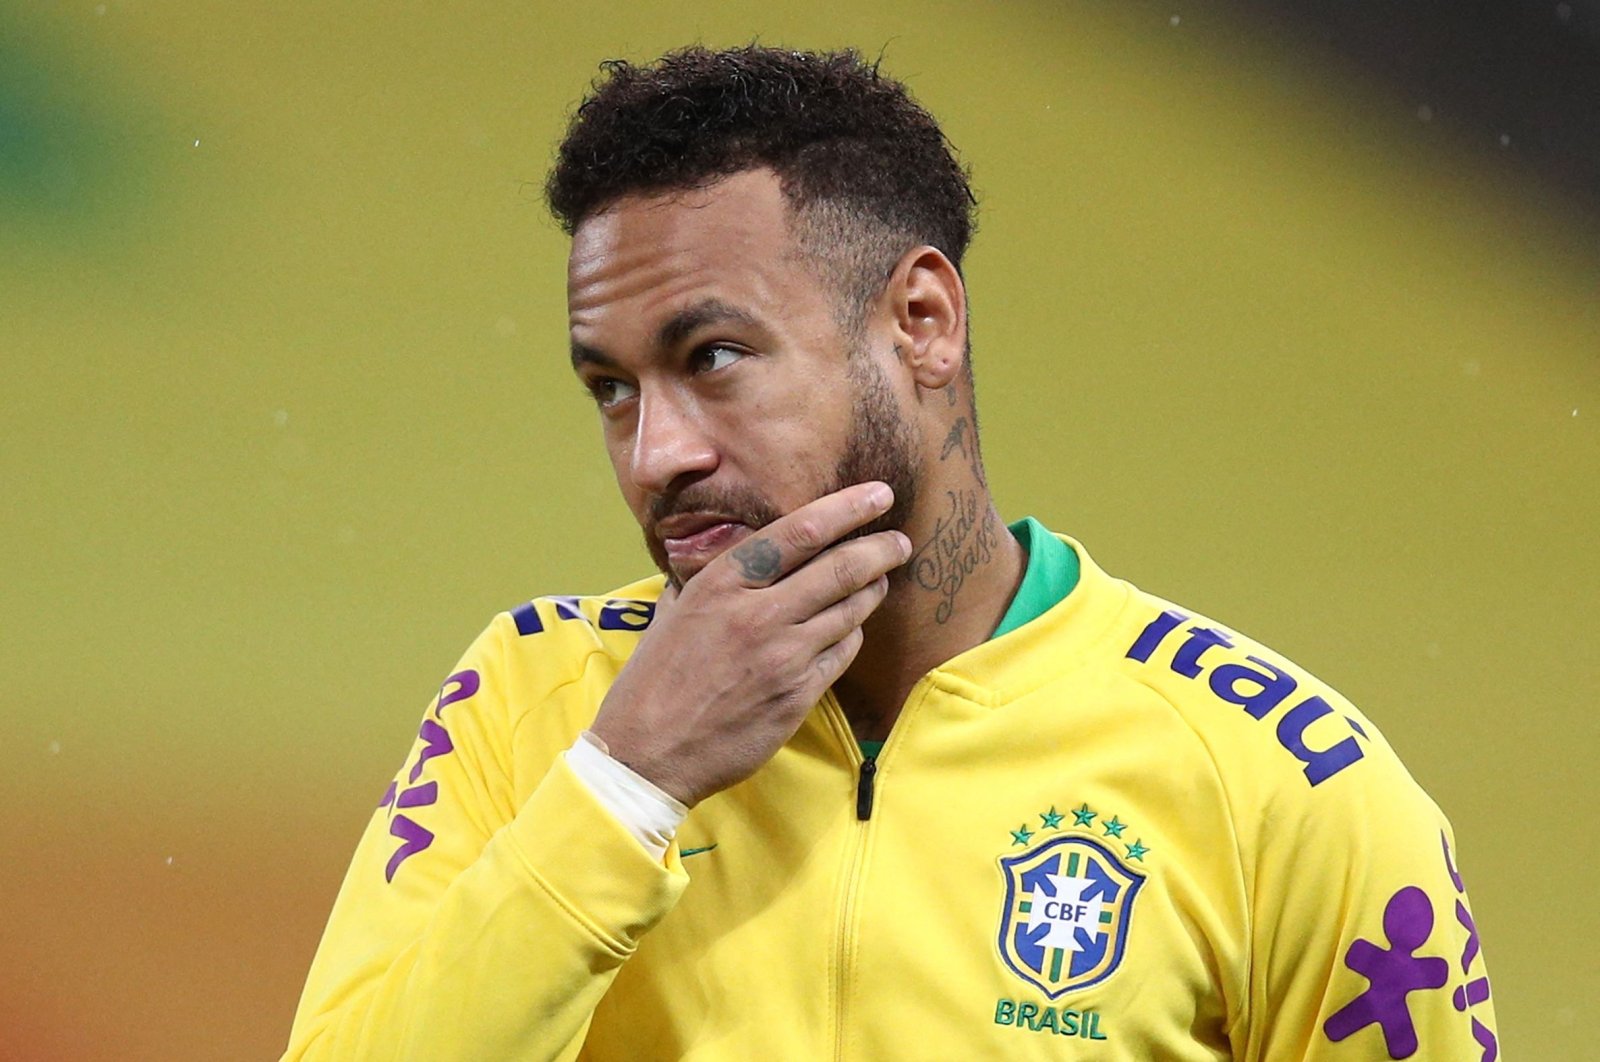 Neymar faces 2nd fine for environmental violations at Rio mansion